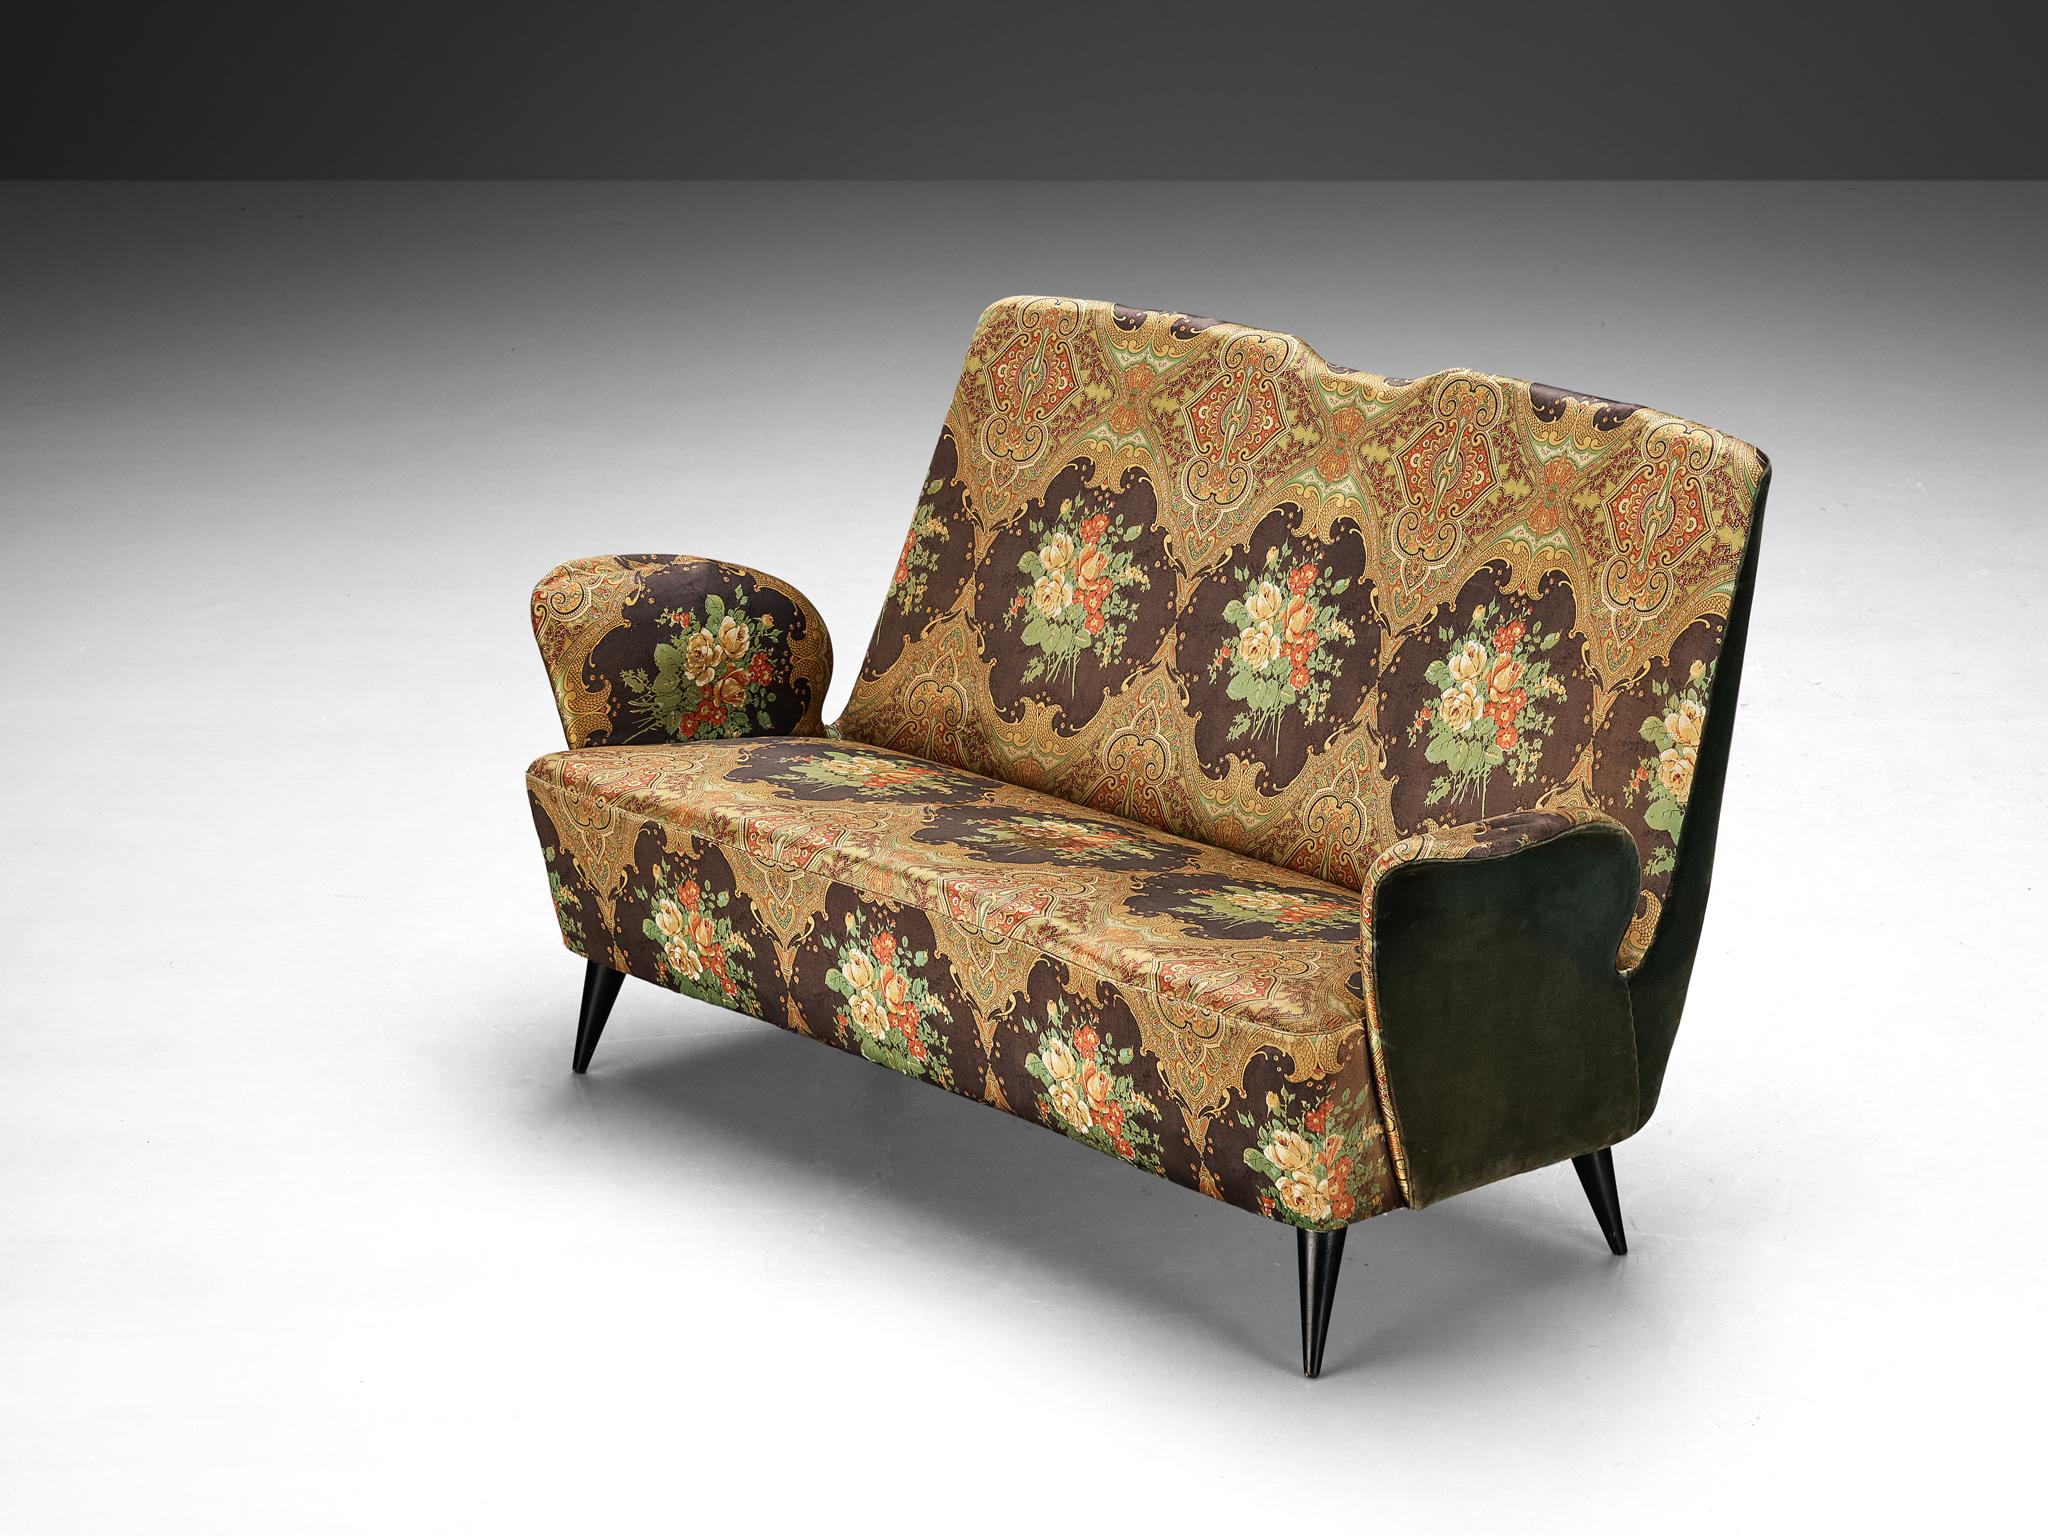 Sofa, fabric and wood, Italy, 1960s

Highly theatrical sofa that features curved, upsweeping armrests. This piece is made in Italy in the 1960s. The slightly tapered backrest is sculptural and theatrical. The titled, conical legs are made of black